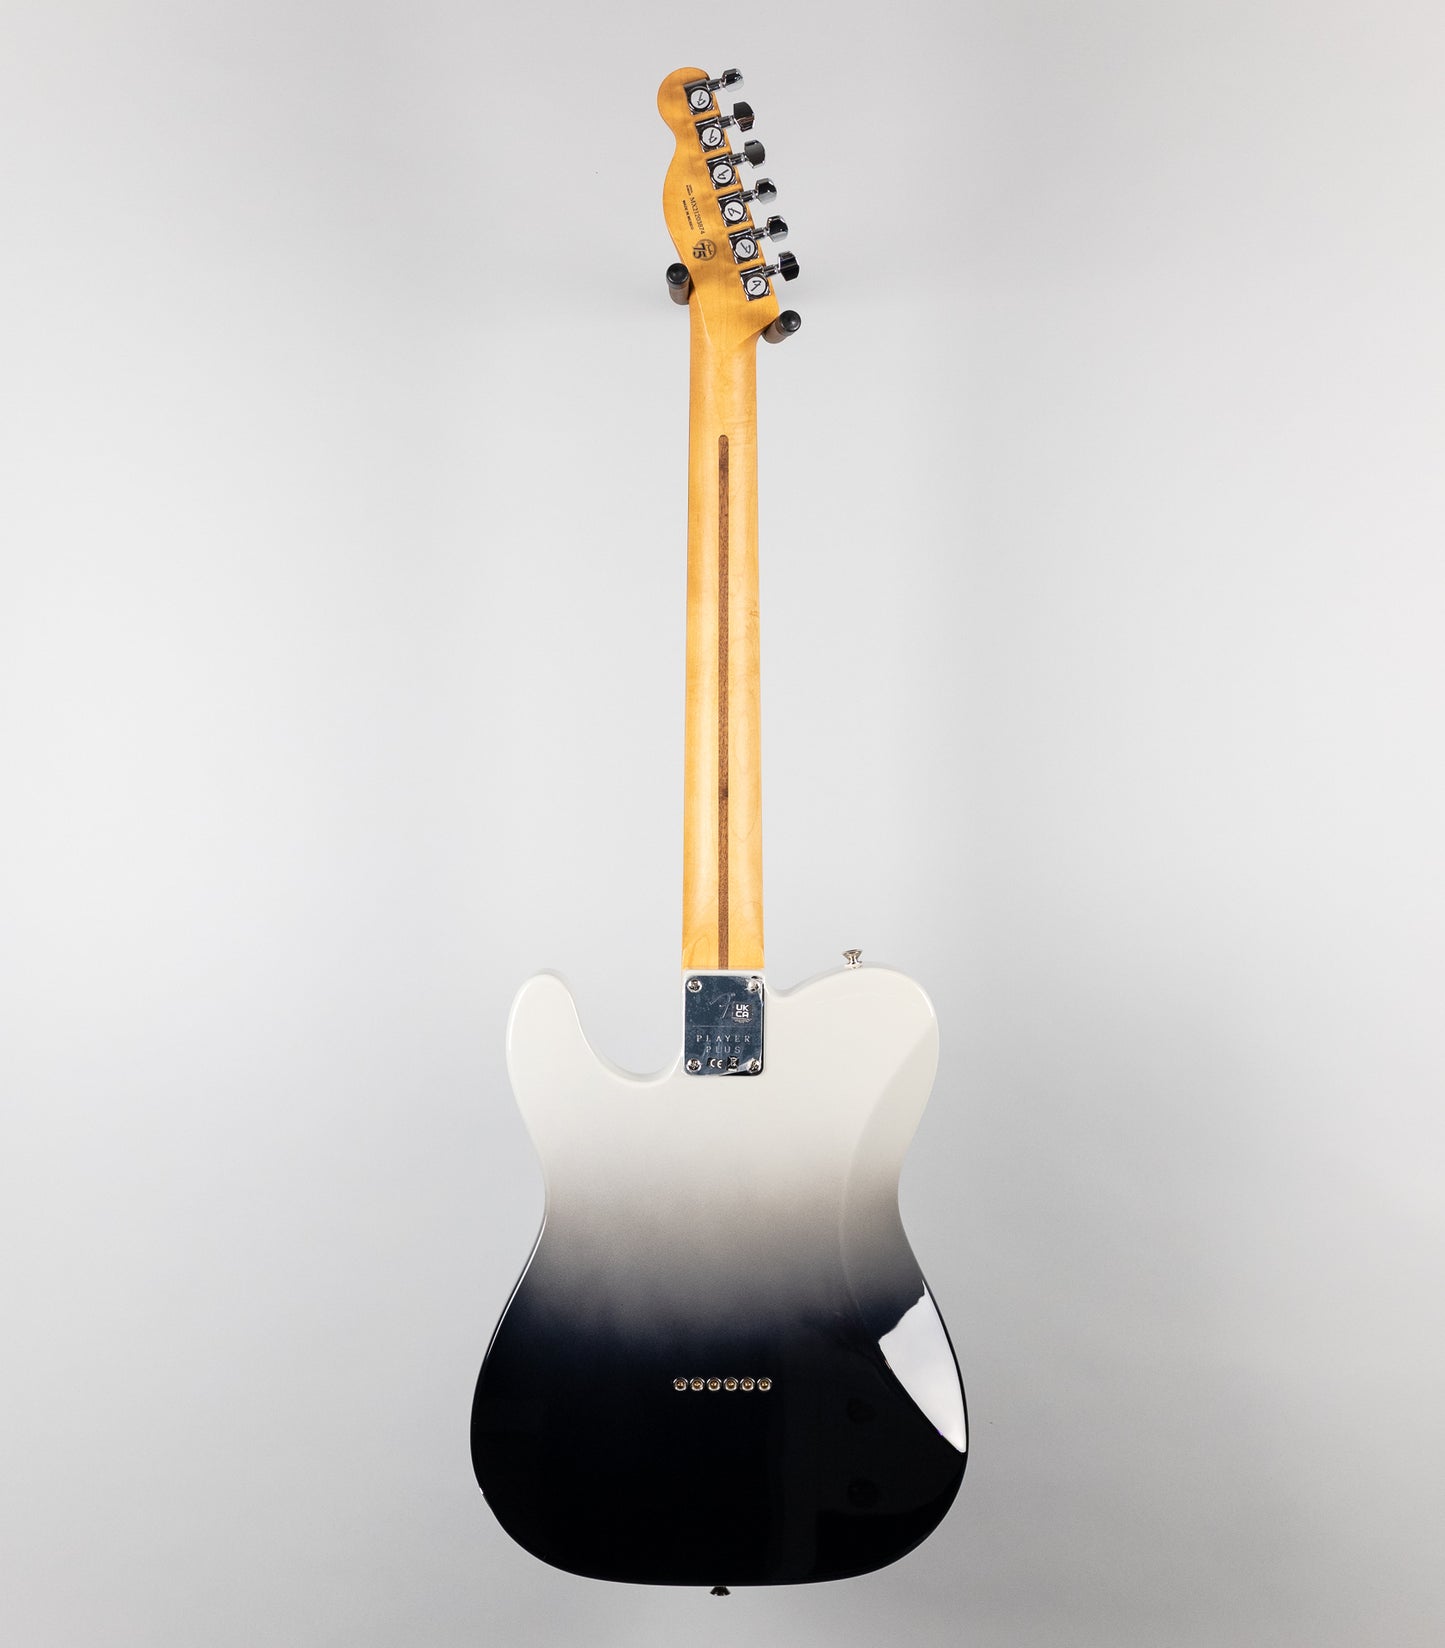 Fender Player Plus Telecaster in Silver Smoke (MX21203874)